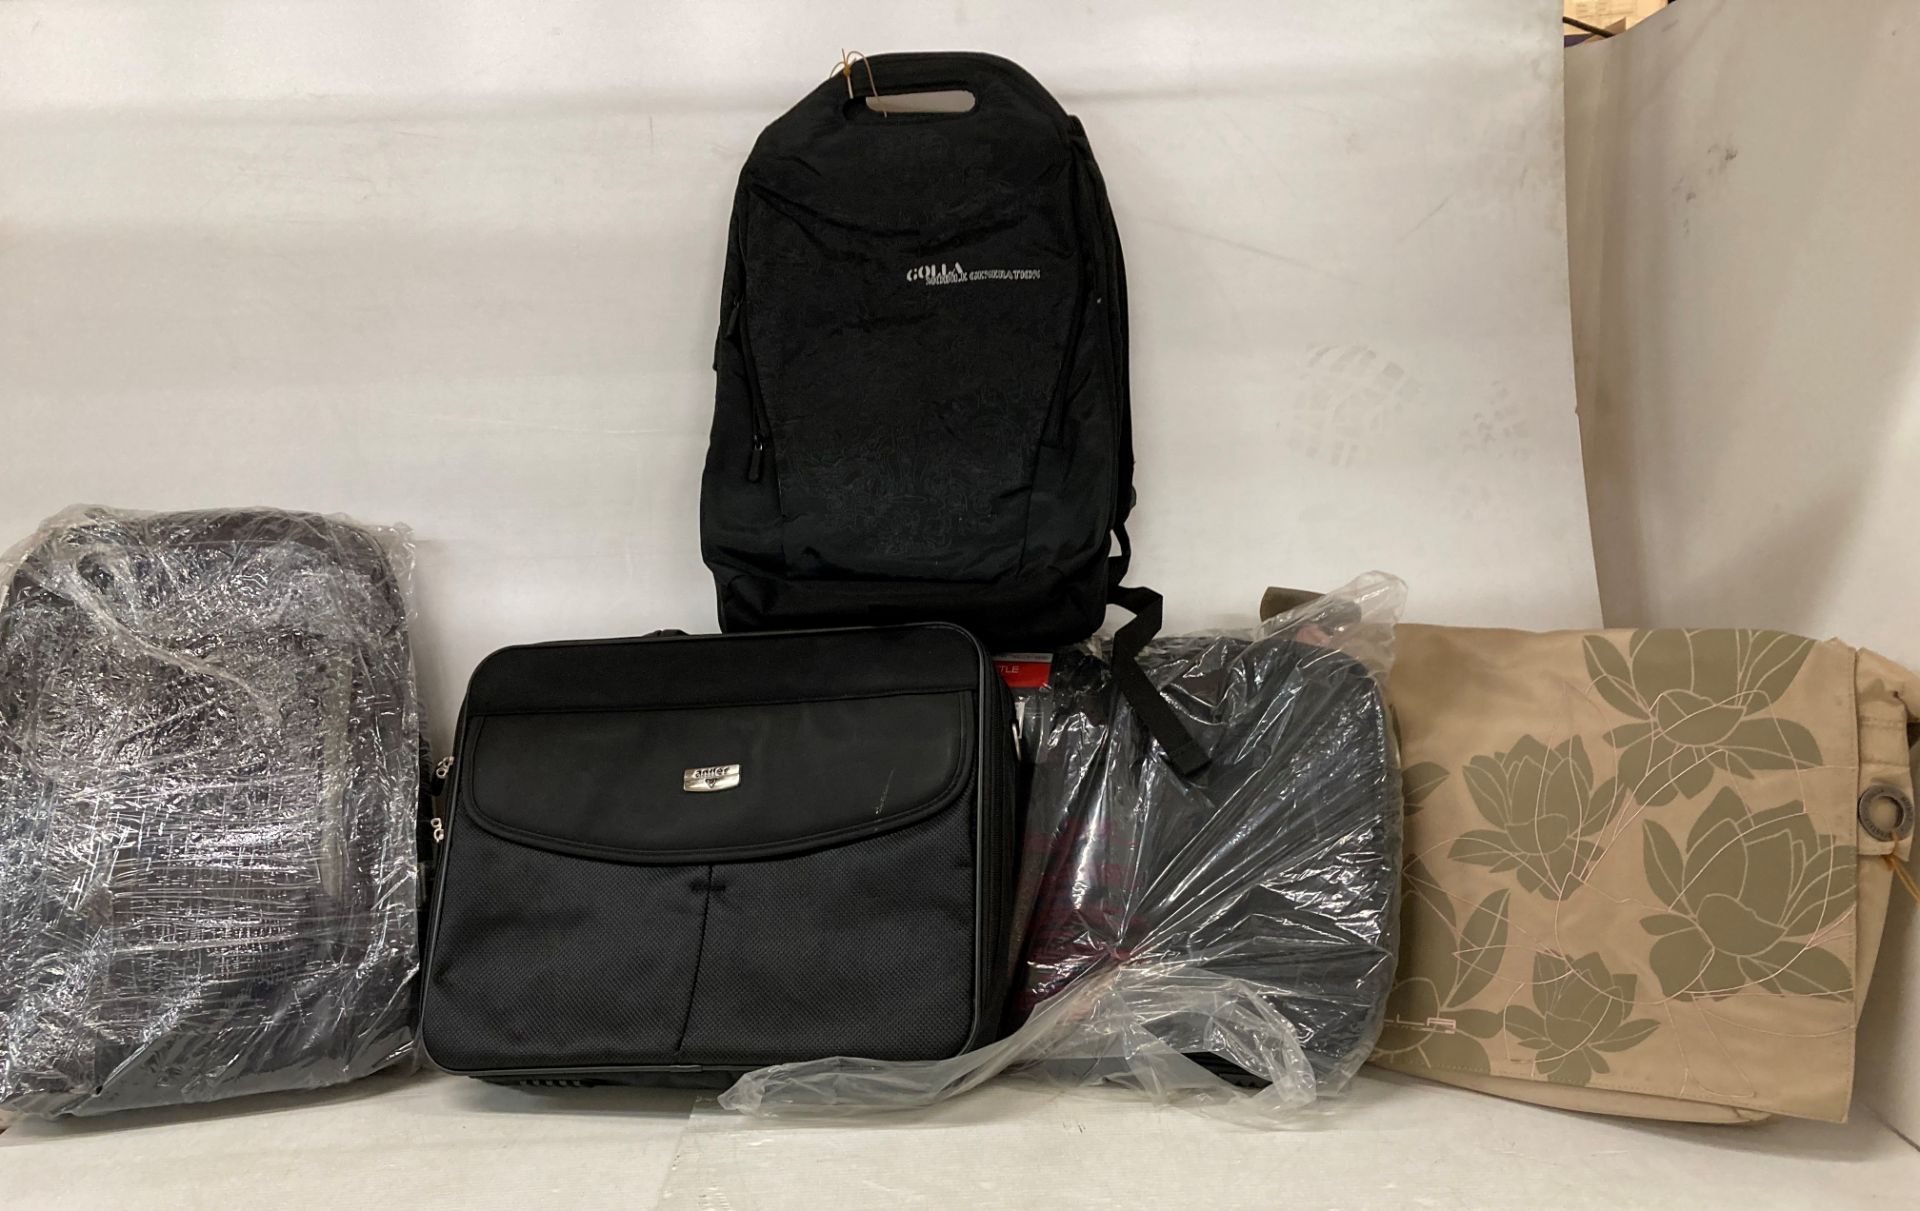 5 x assorted laptop bags by Golla and Antler,